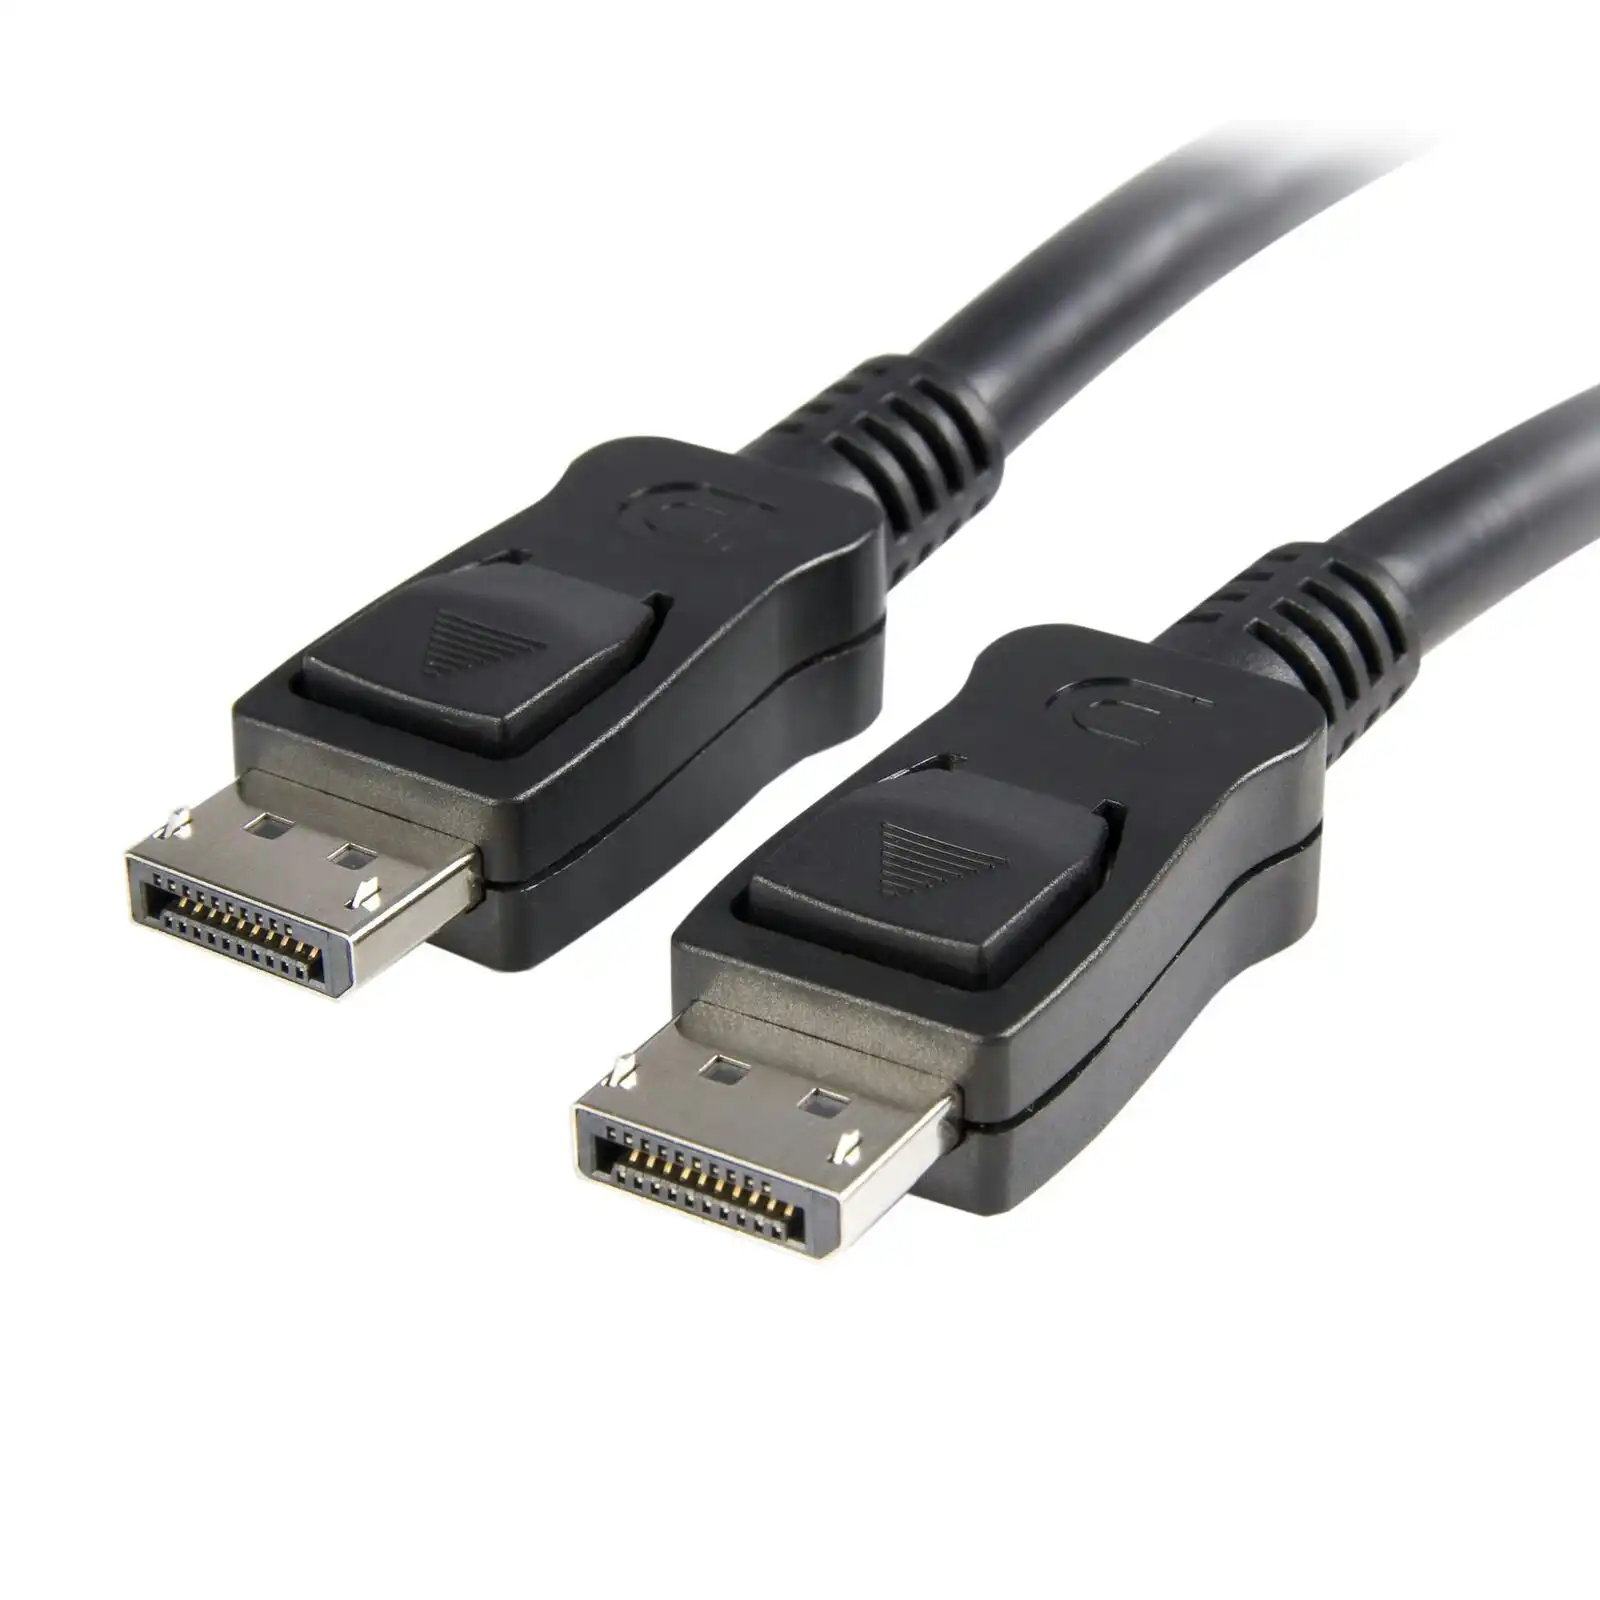 Star Tech DisplayPort Cable 1.2 5m Male To Male w/ Latches 4k x 2k/60Hz 21.6Gbps